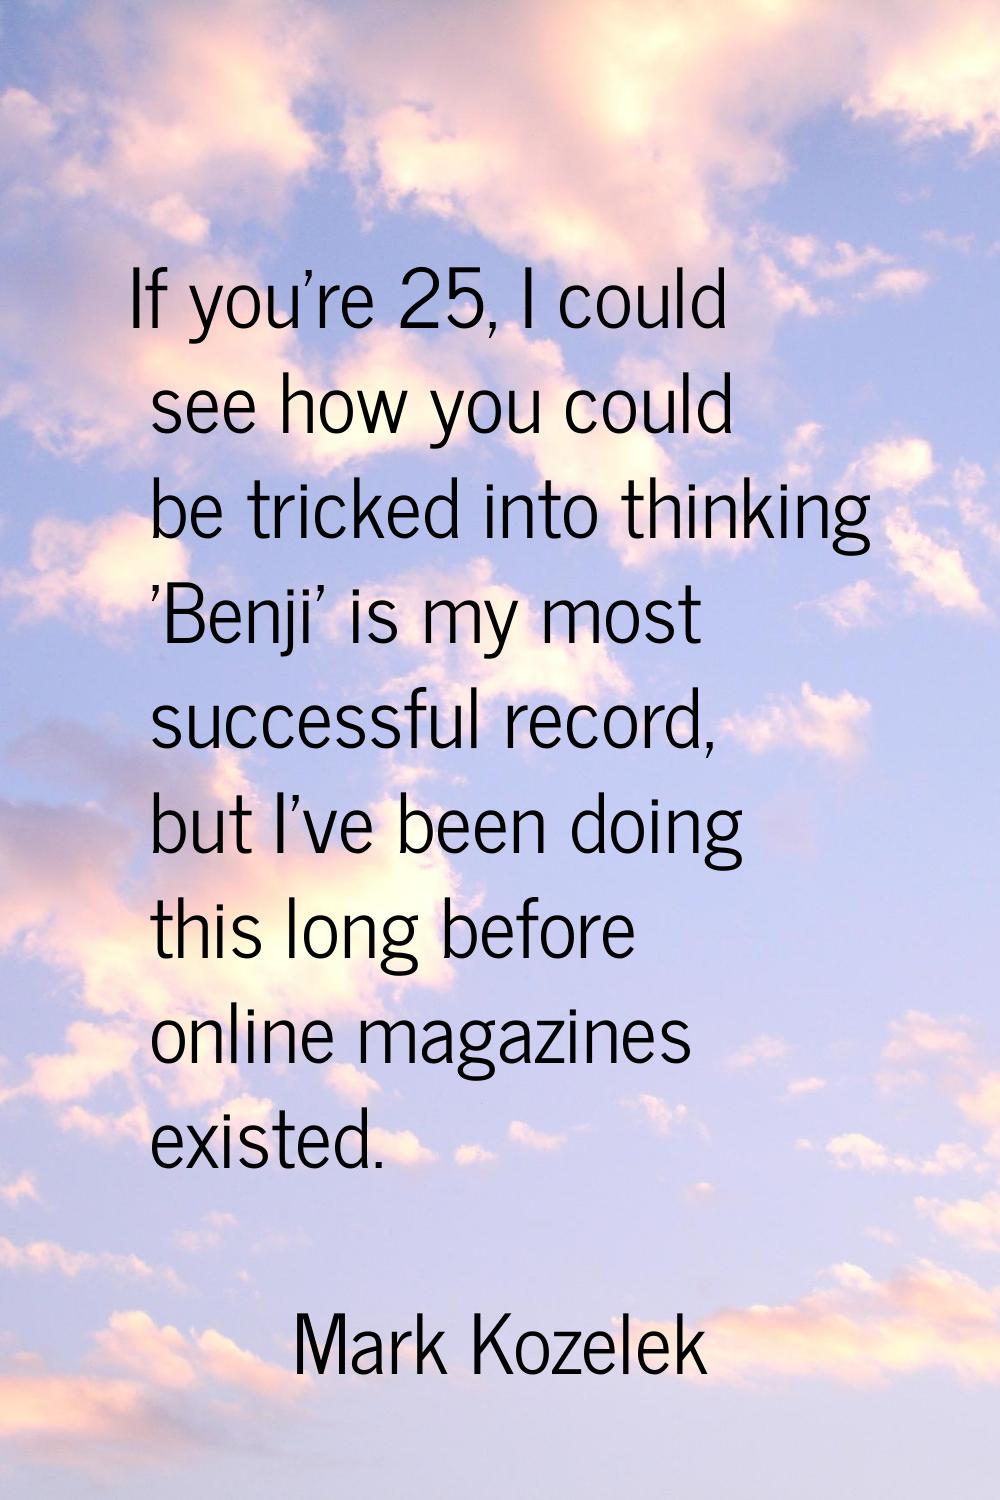 If you're 25, I could see how you could be tricked into thinking 'Benji' is my most successful reco